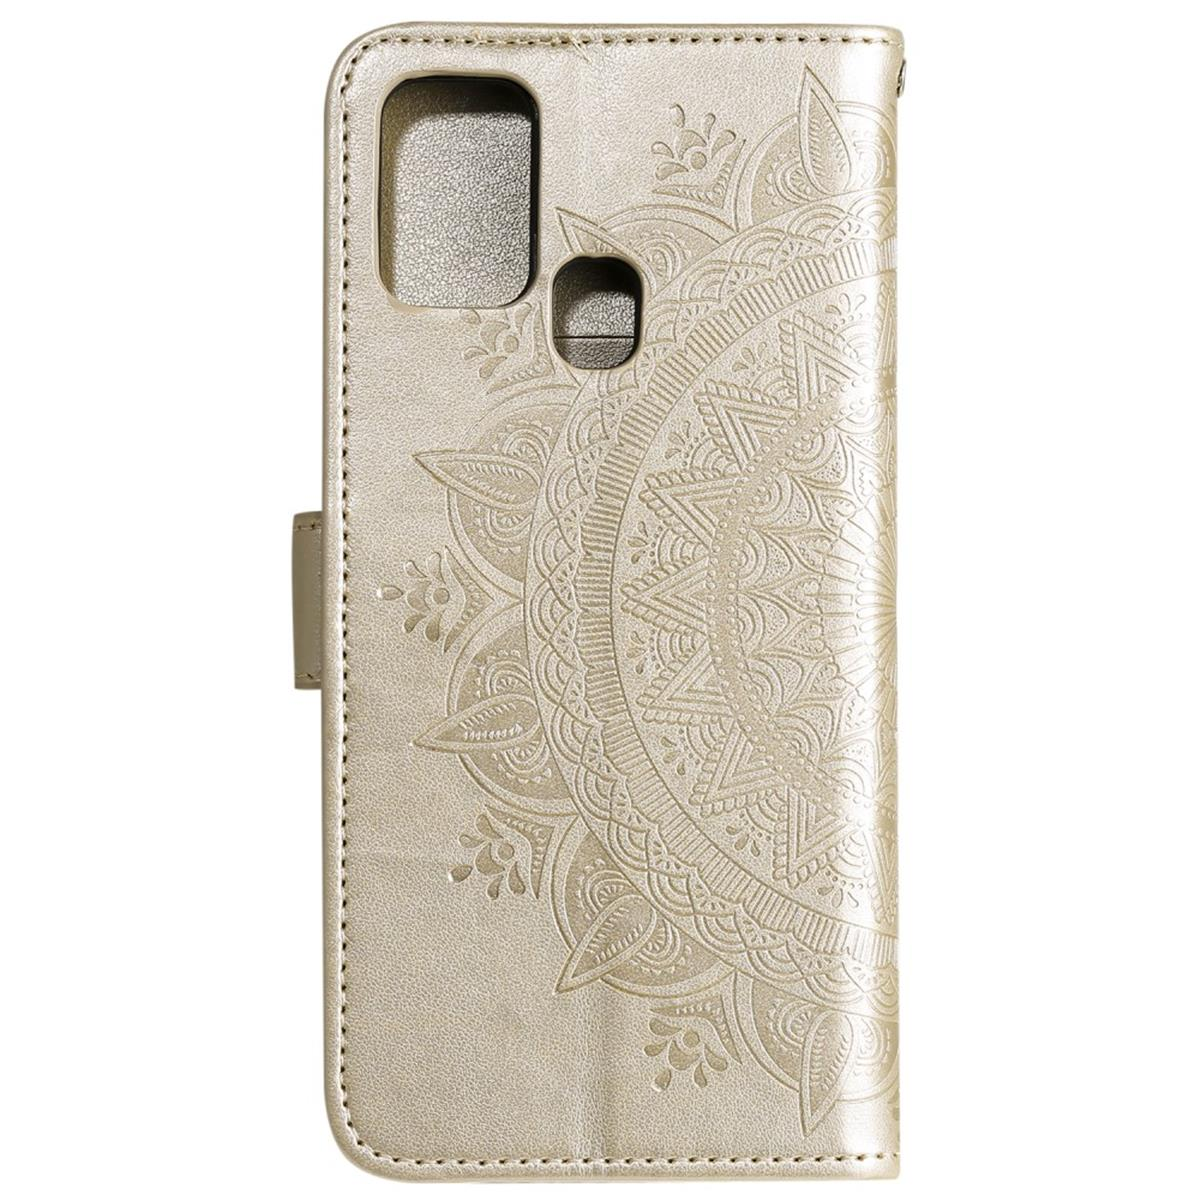 mit Huawei, Mandala Smart Klapphülle P 2020, Muster, COVERKINGZ Gold Bookcover,